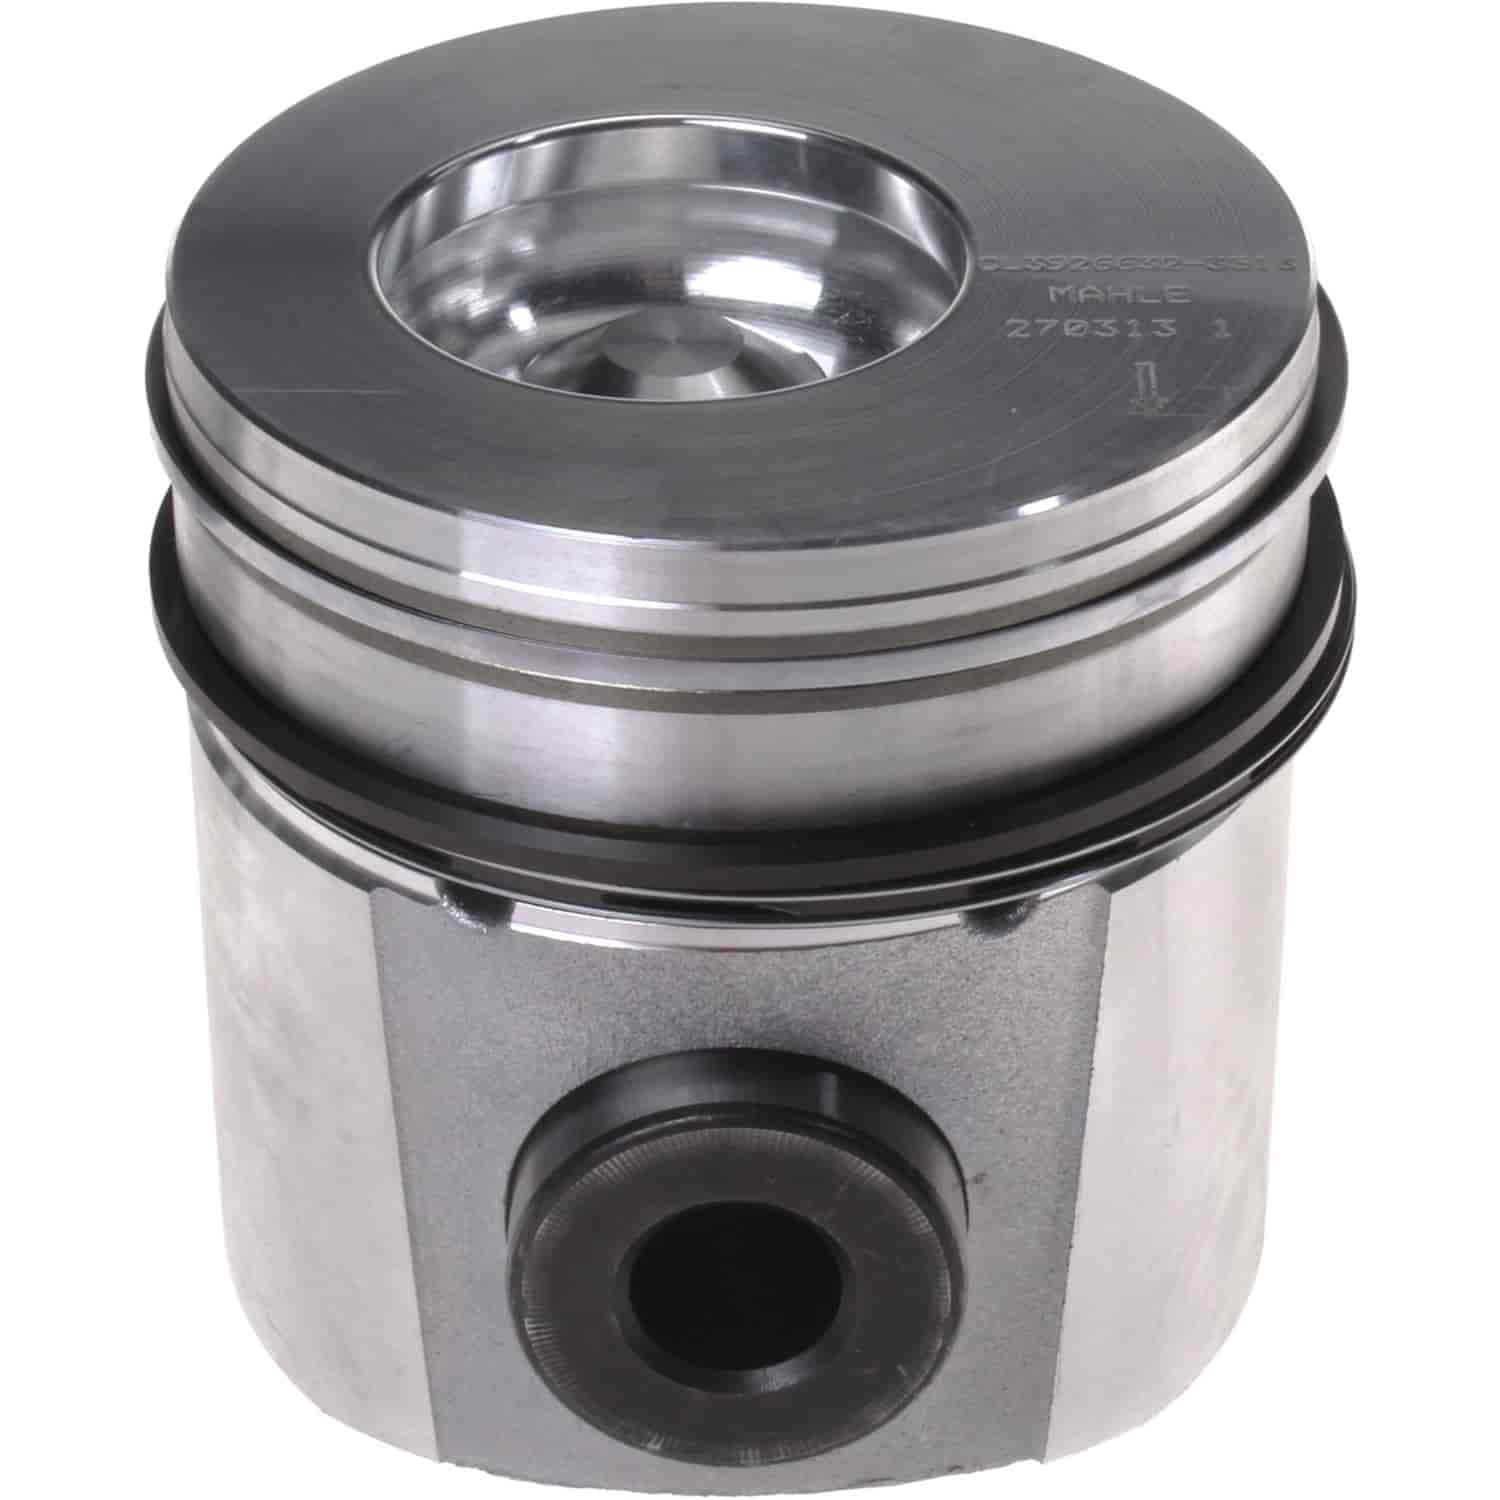 Piston With Rings 1994-1998 Dodge, Fits Cummins Diesel L6 5.9L with 4.056" Bore (+.040")